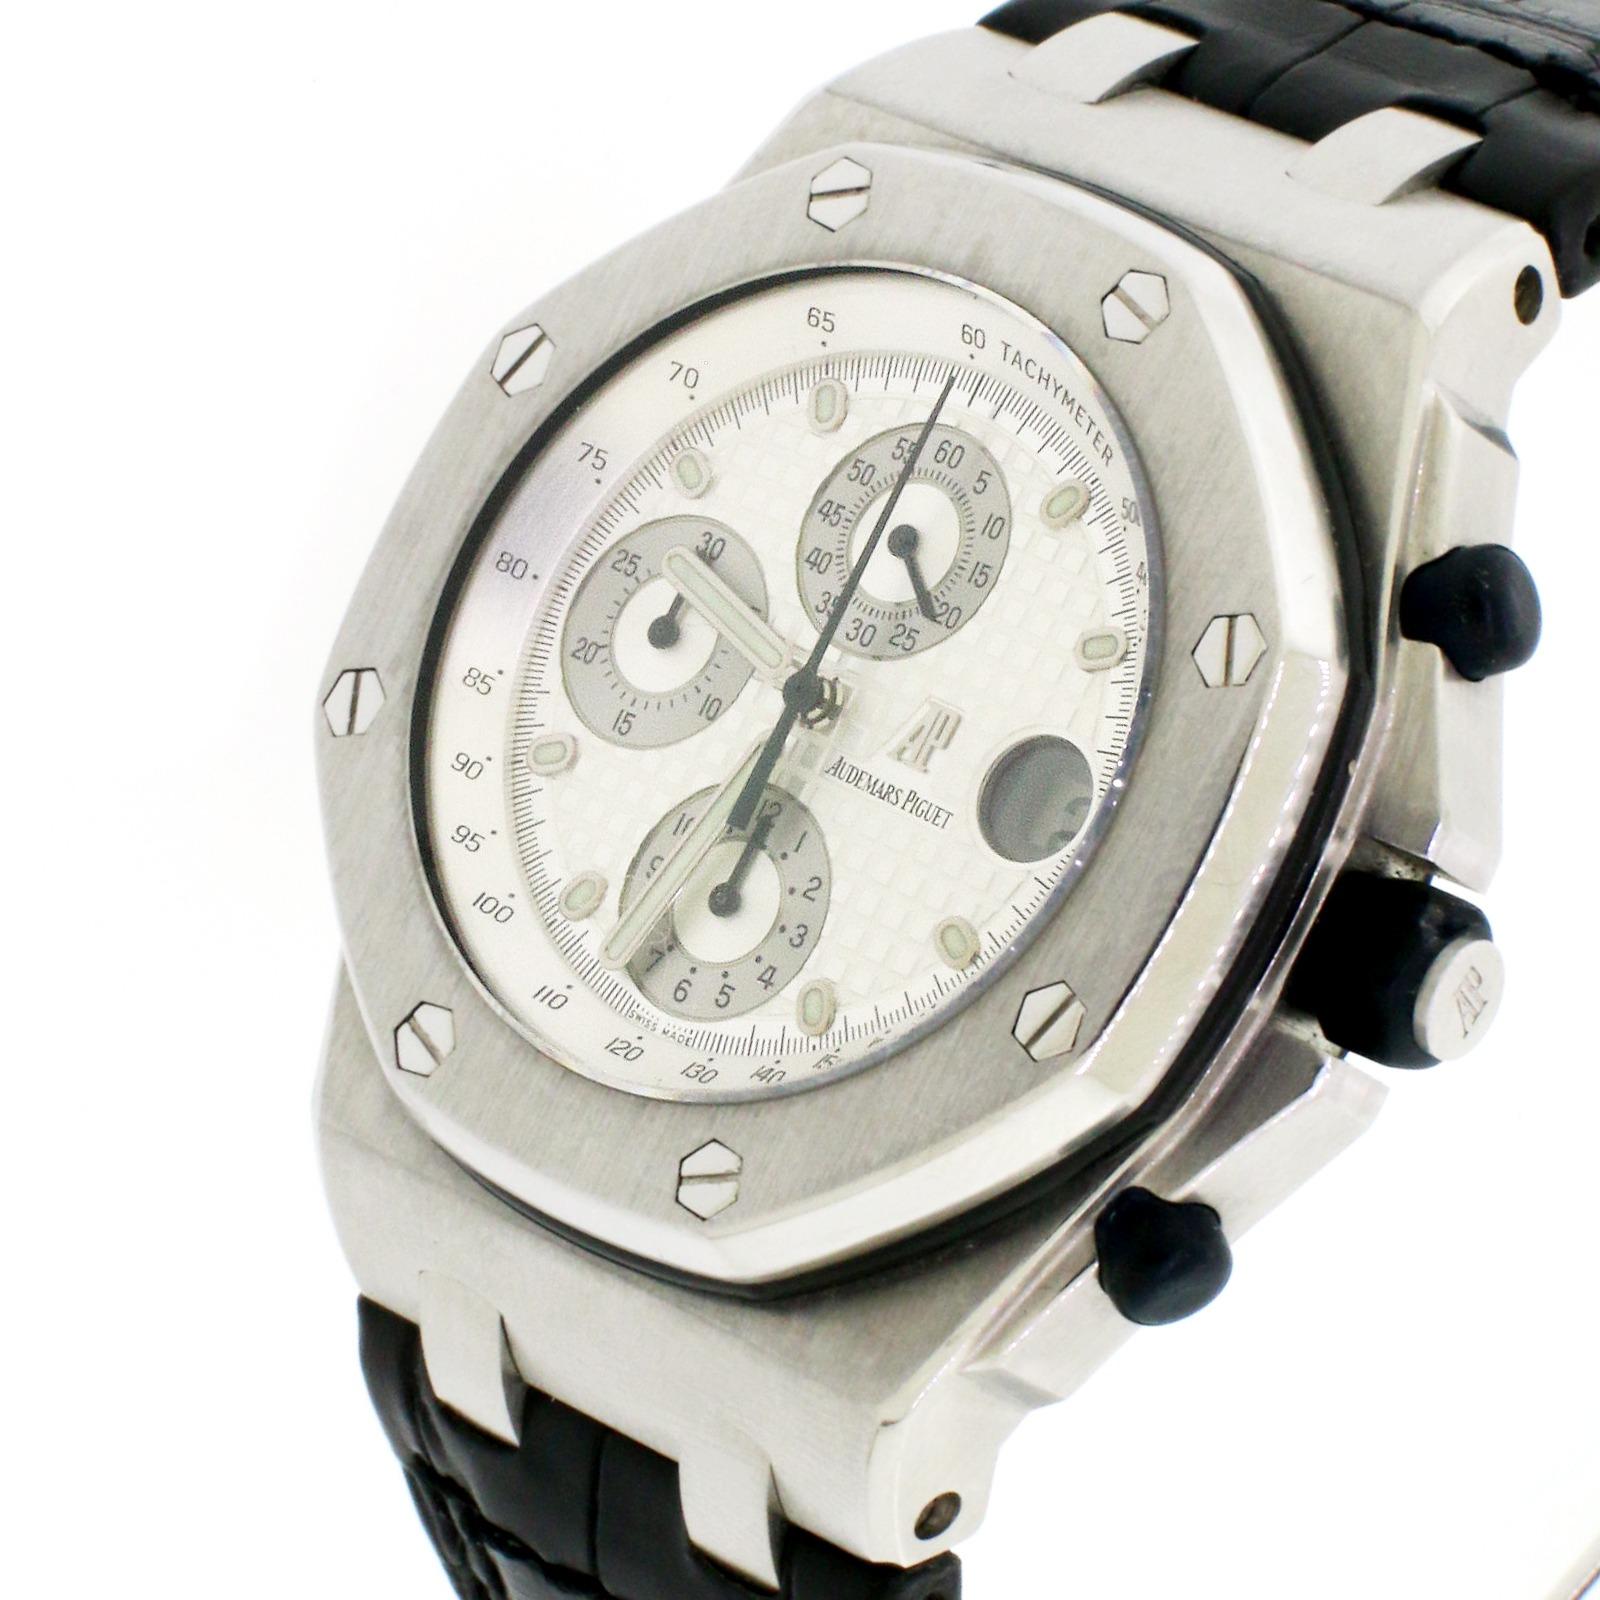 Audemars Piguet Royal Oak Offshore Chronograph Steel Watch In Excellent Condition For Sale In New York, NY